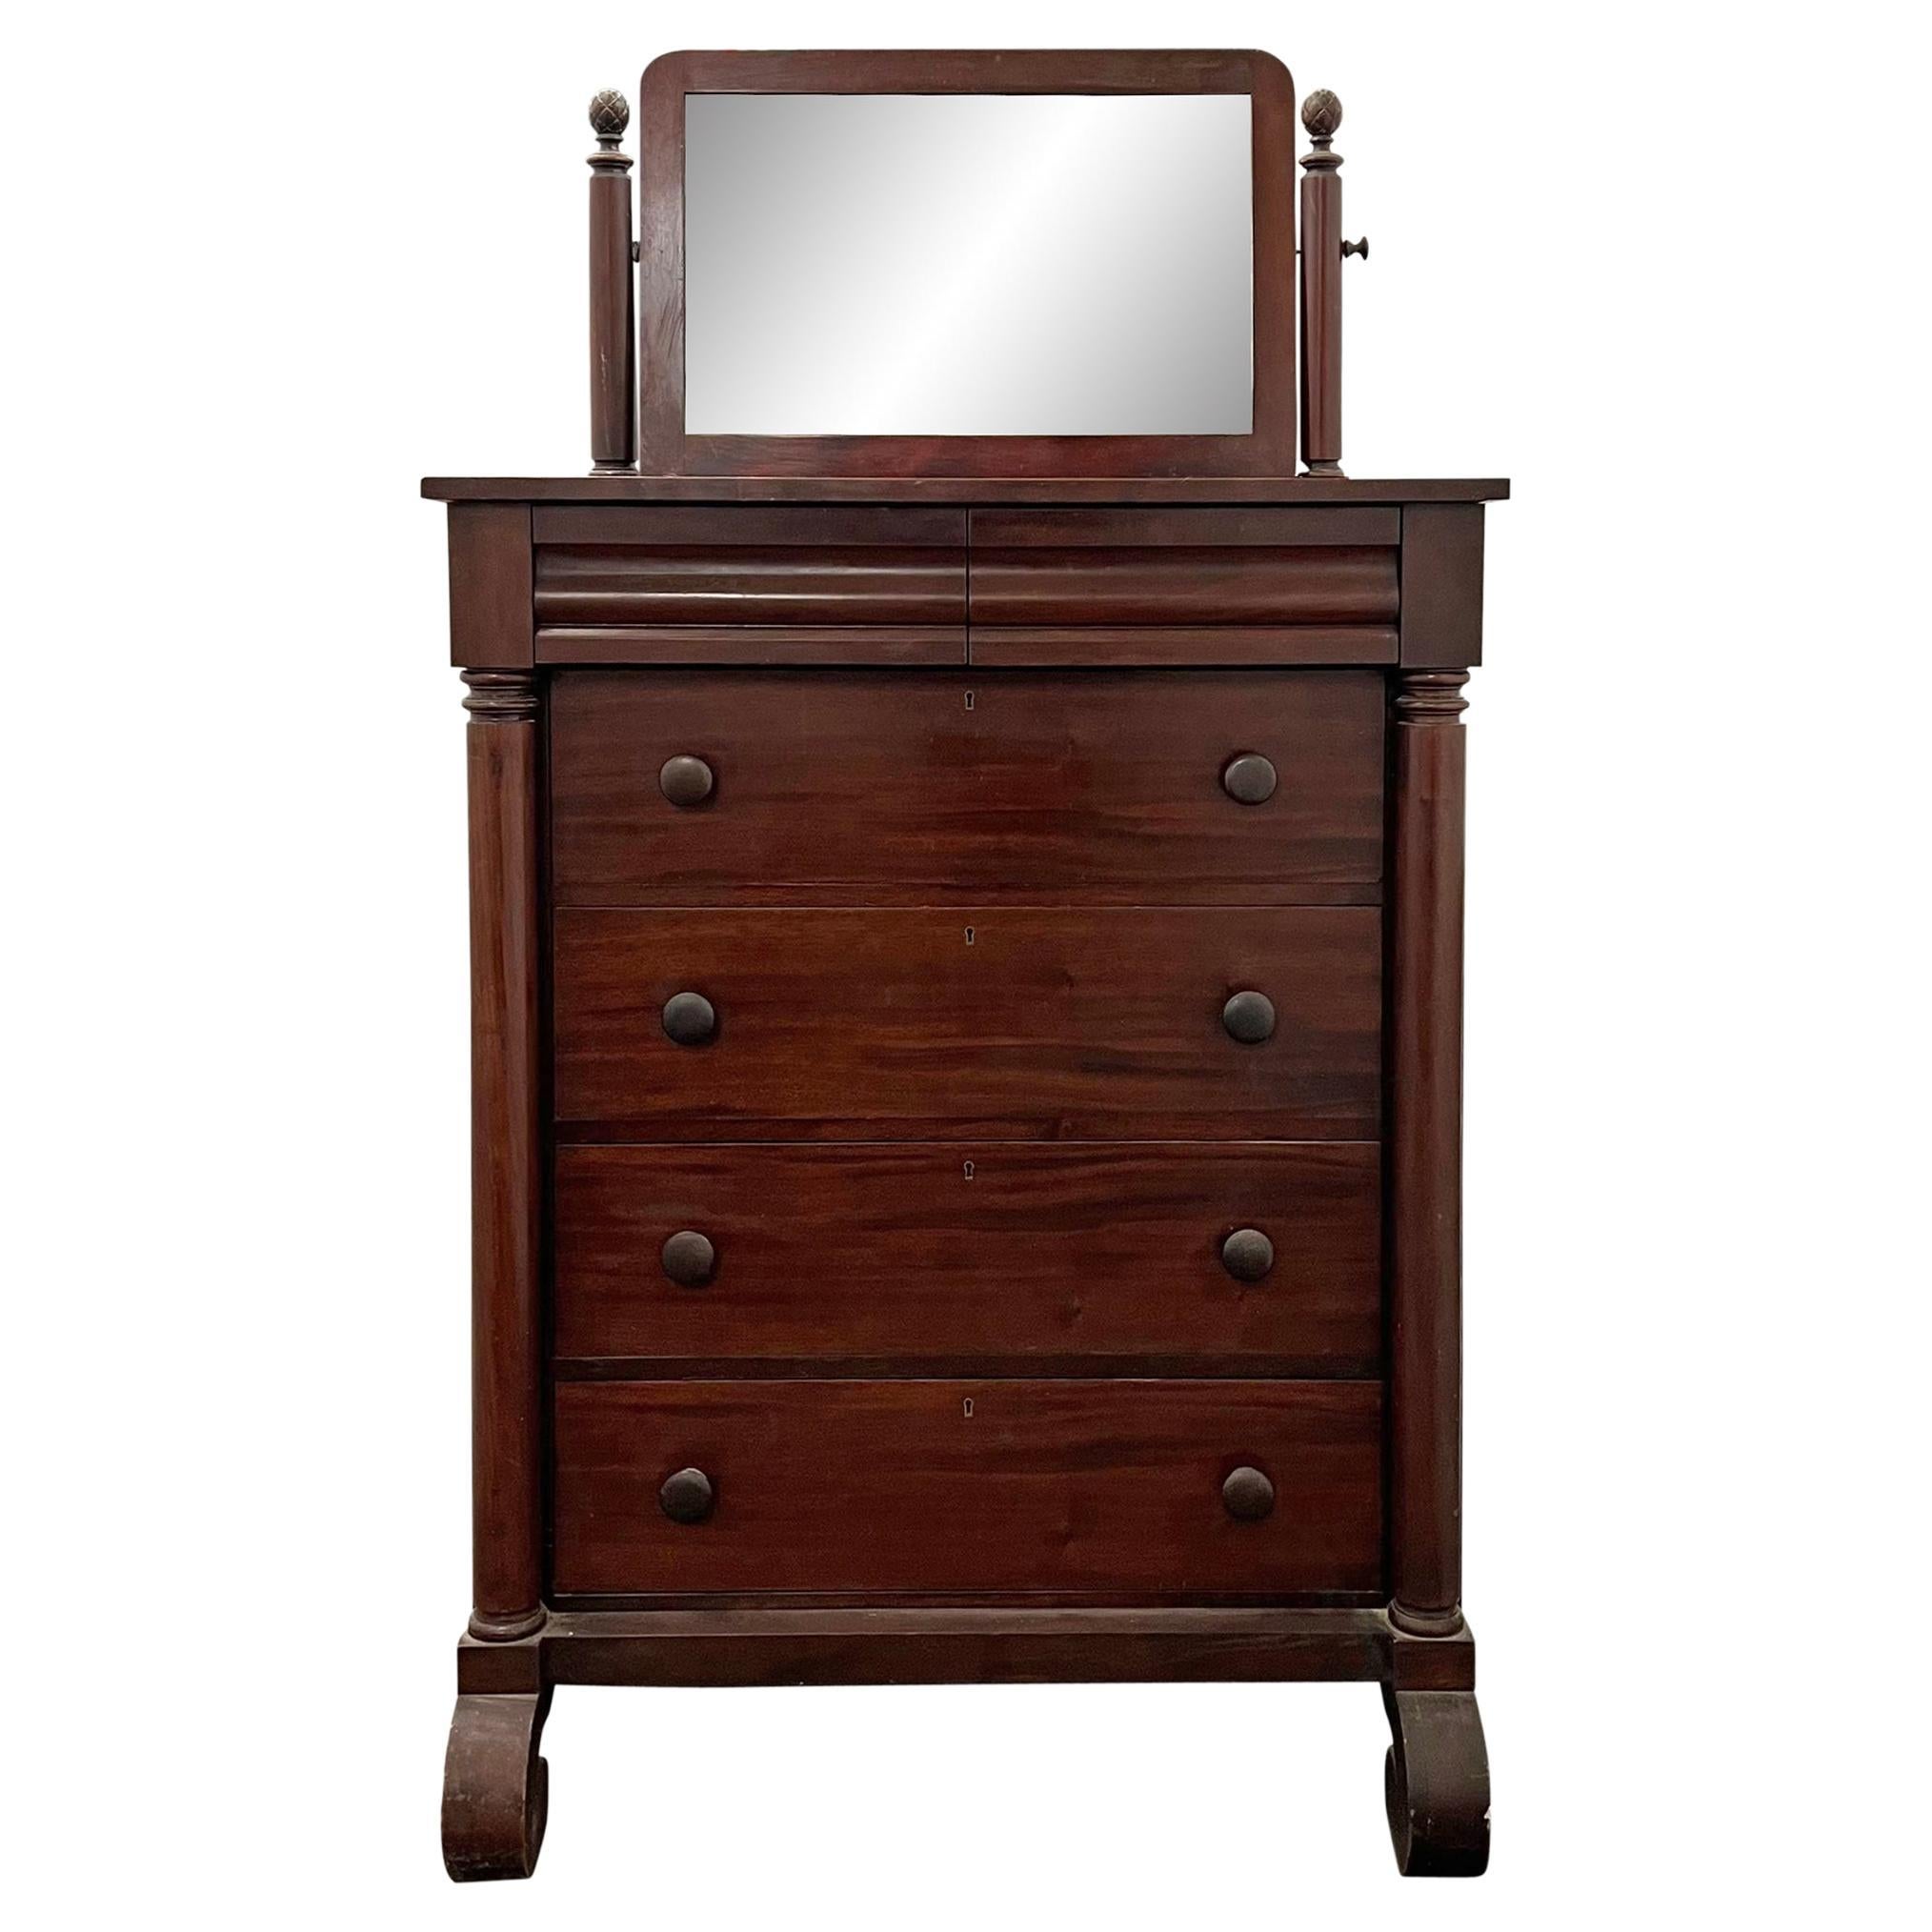 Late 19th Century American Empire Chest of Drawers with Mirror For Sale